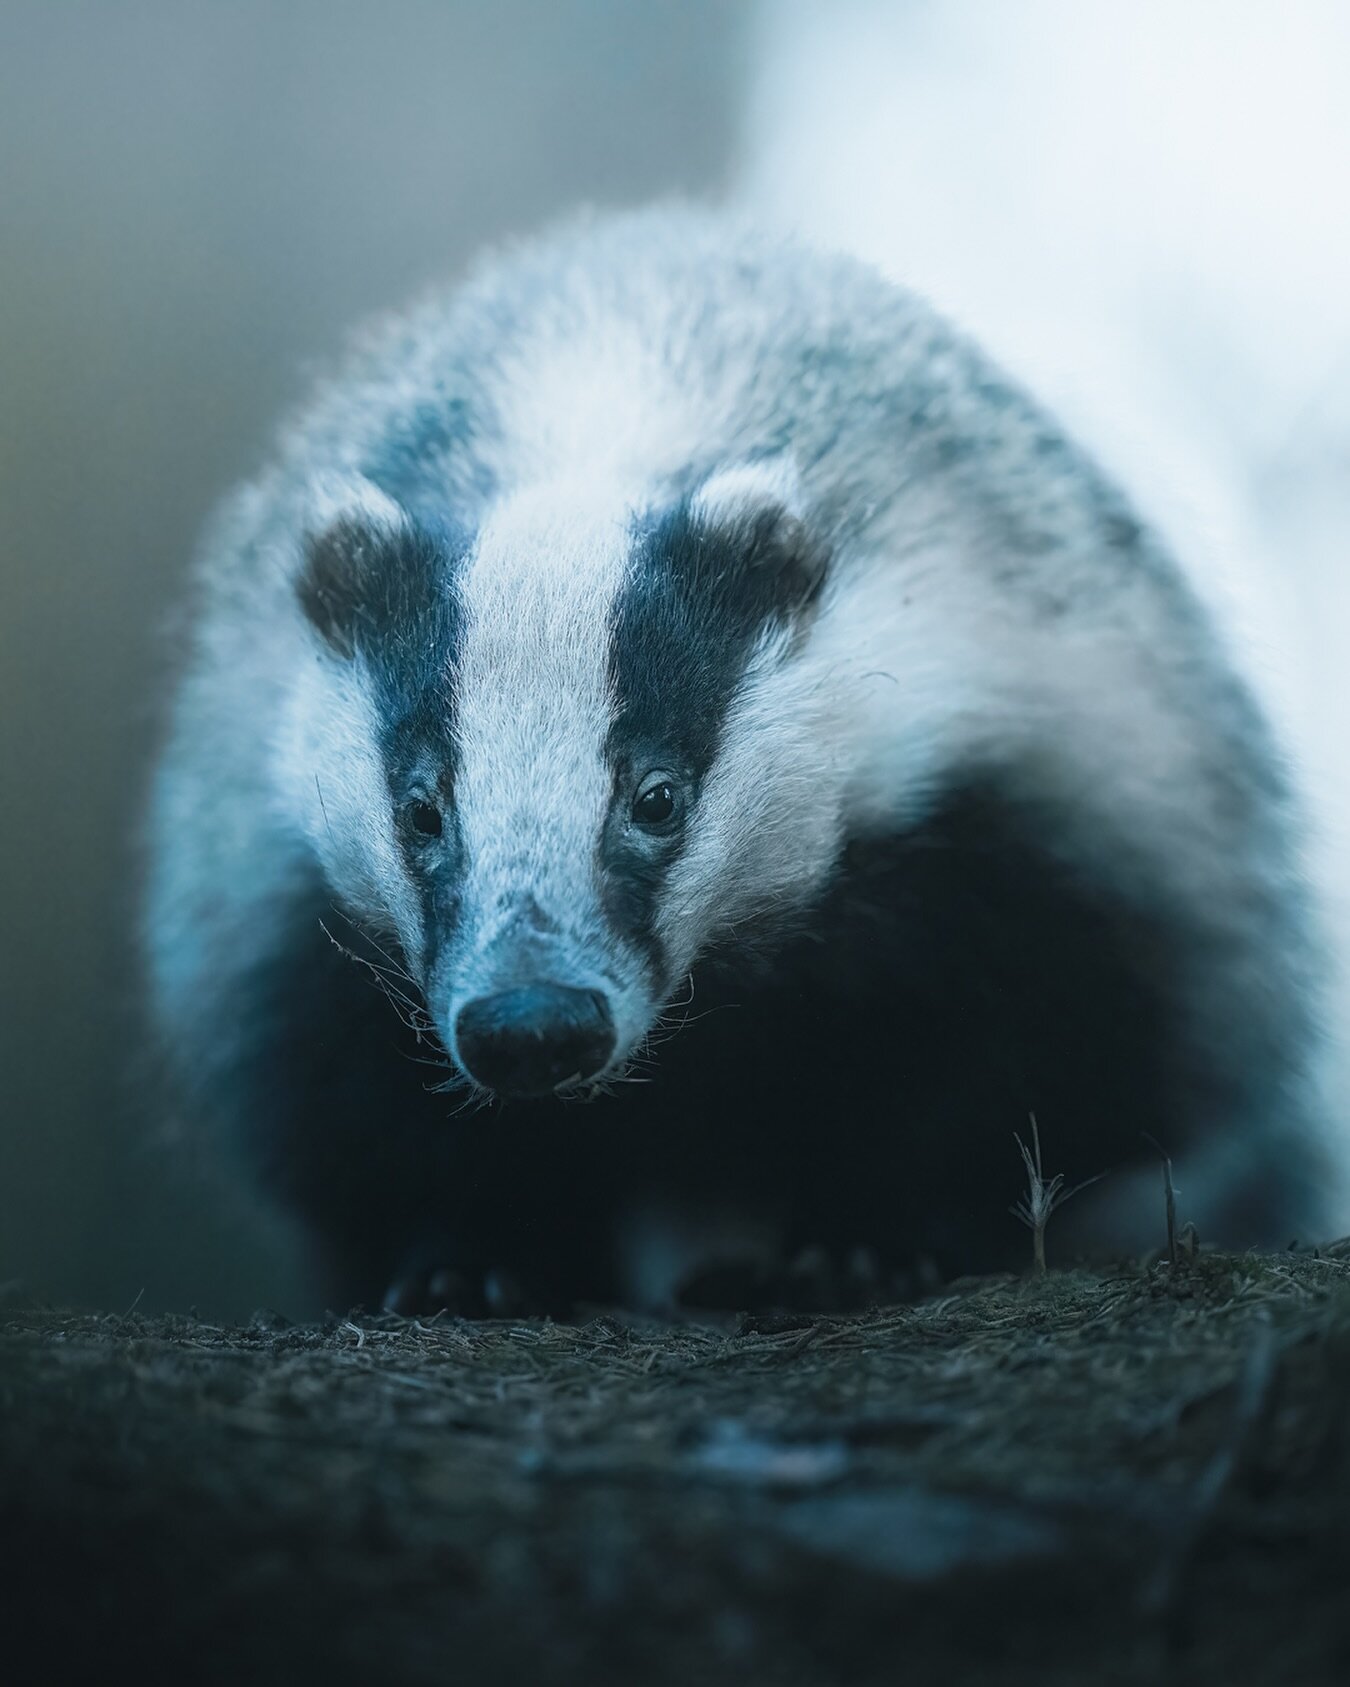 Recently, I&rsquo;ve been out without the camera, scouting areas and observing wildlife with trailcams &mdash;like these guys, badgers, for example. I captured this image using a 400mm 2.8 lens while lying on the ground near their den on the hill las